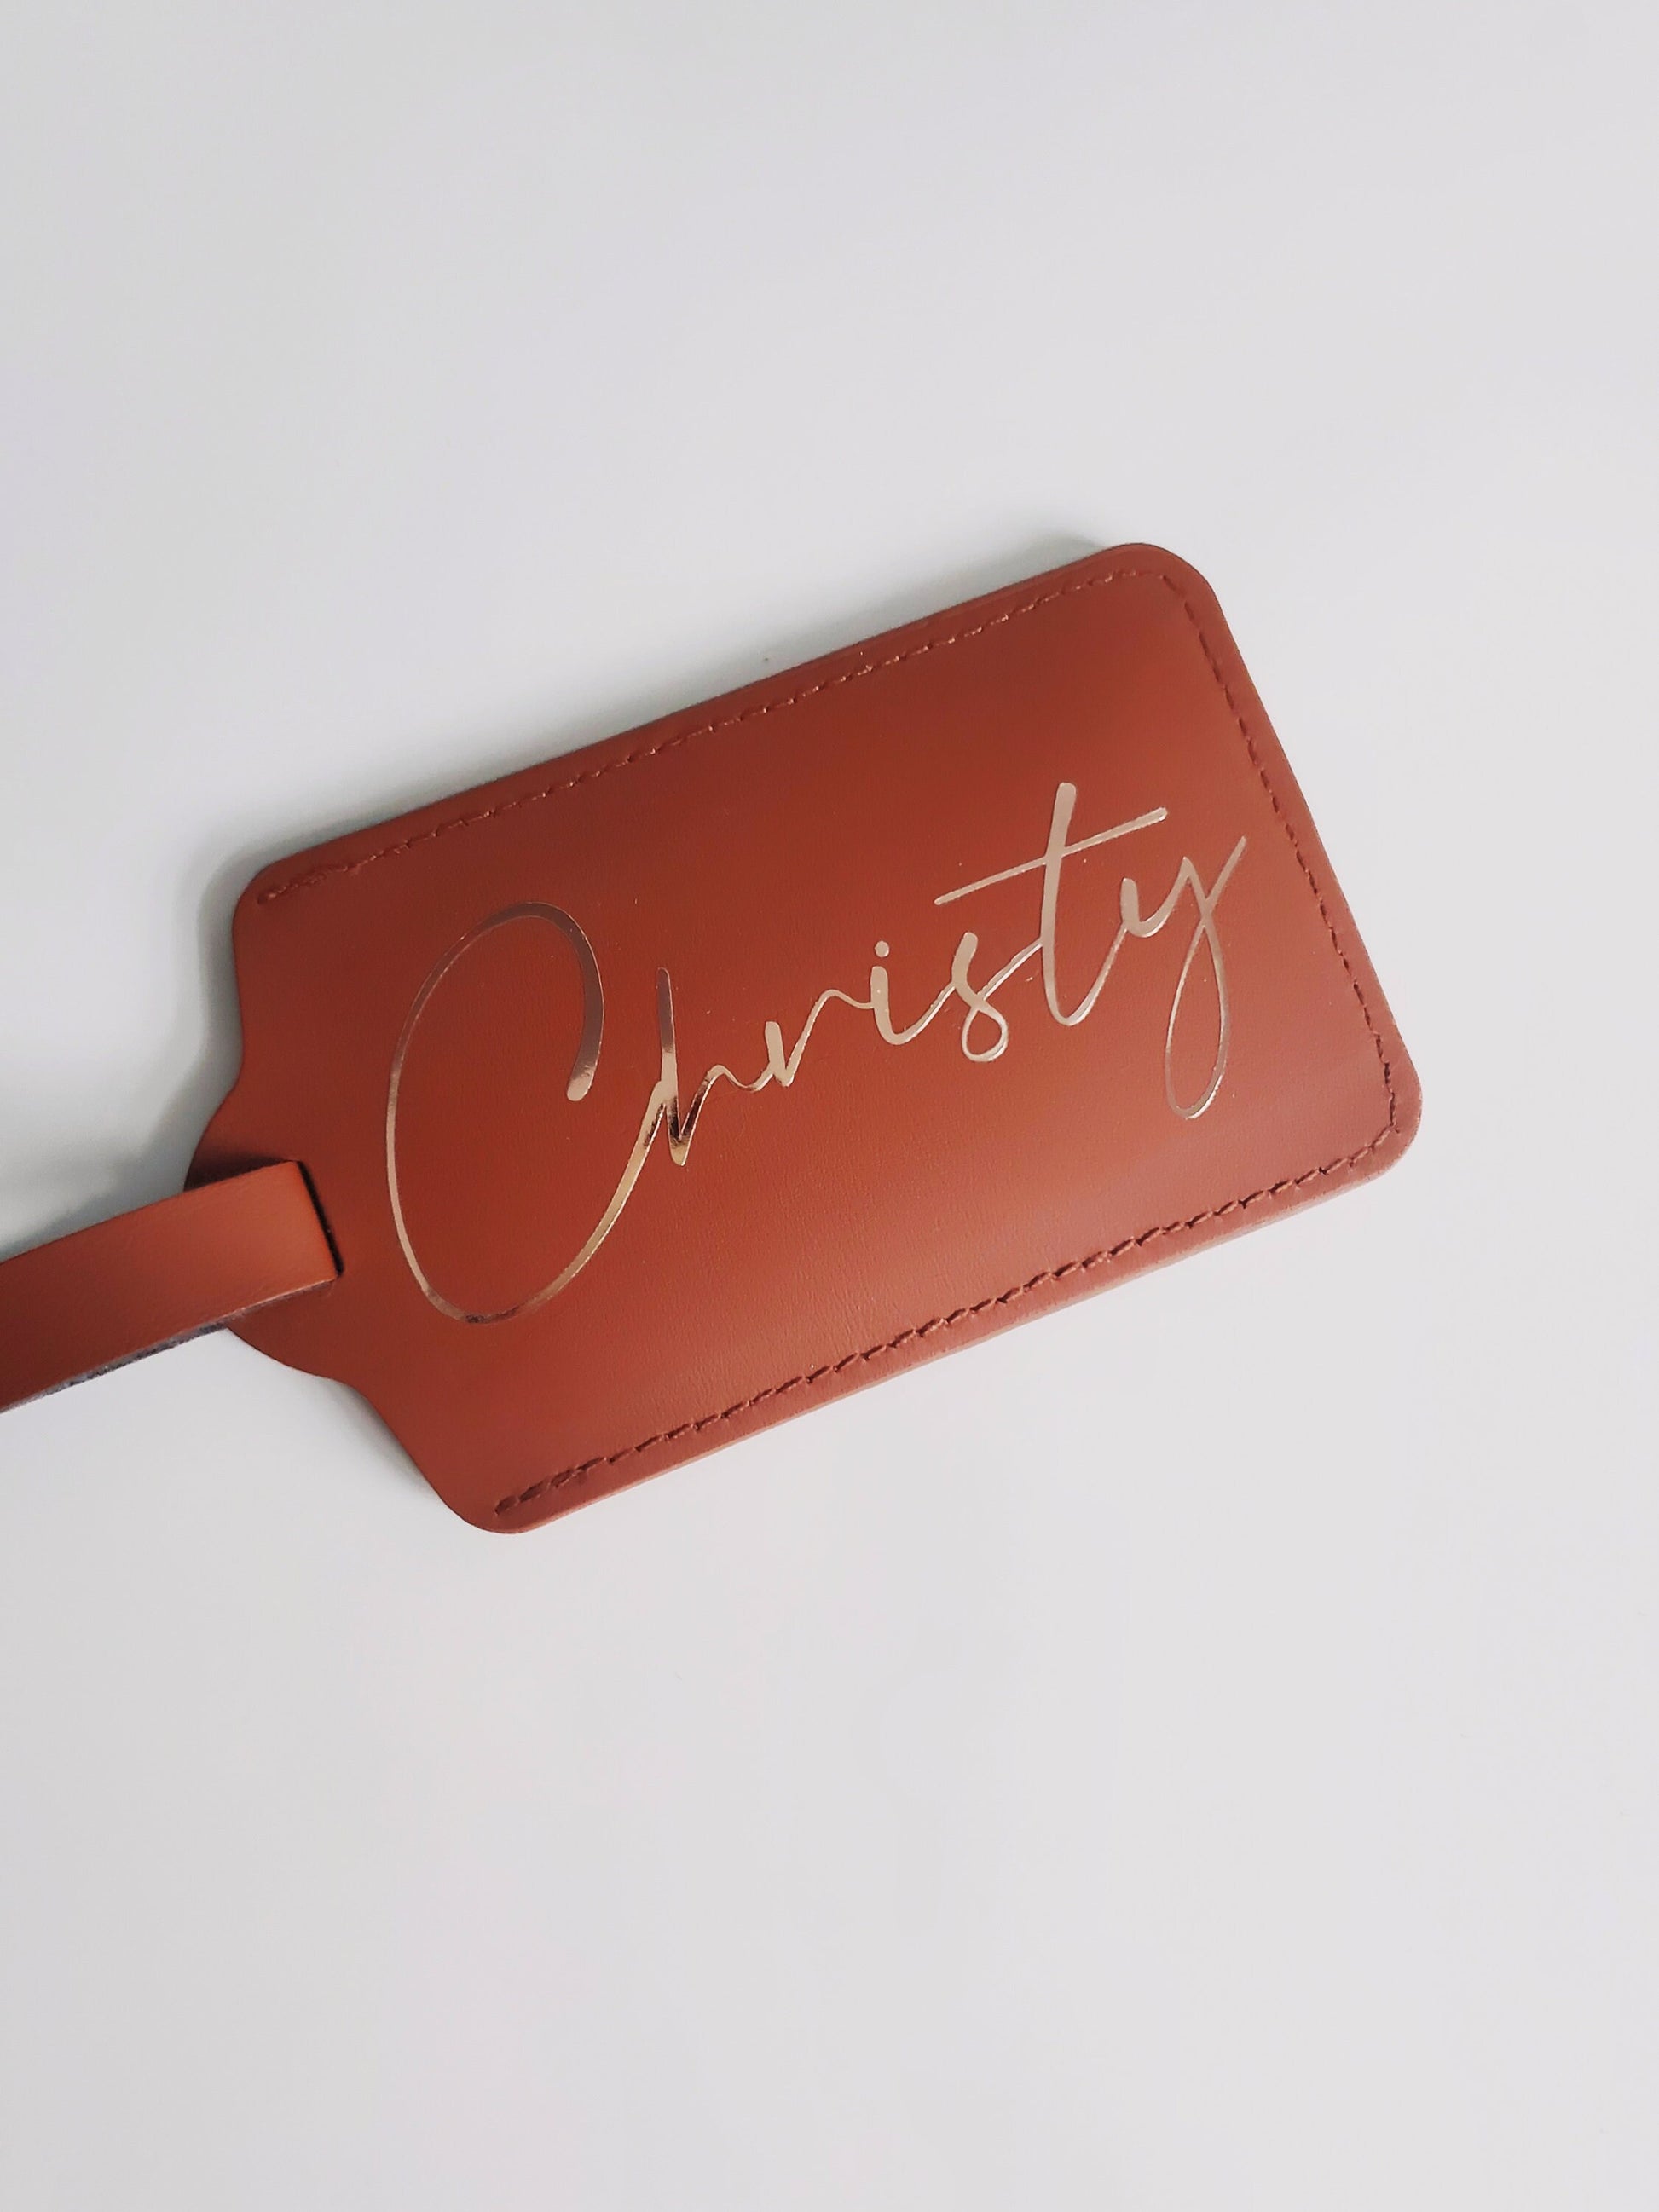 Personalized Luggage Tags (Cursive) – PersonalizedGiftsbyC